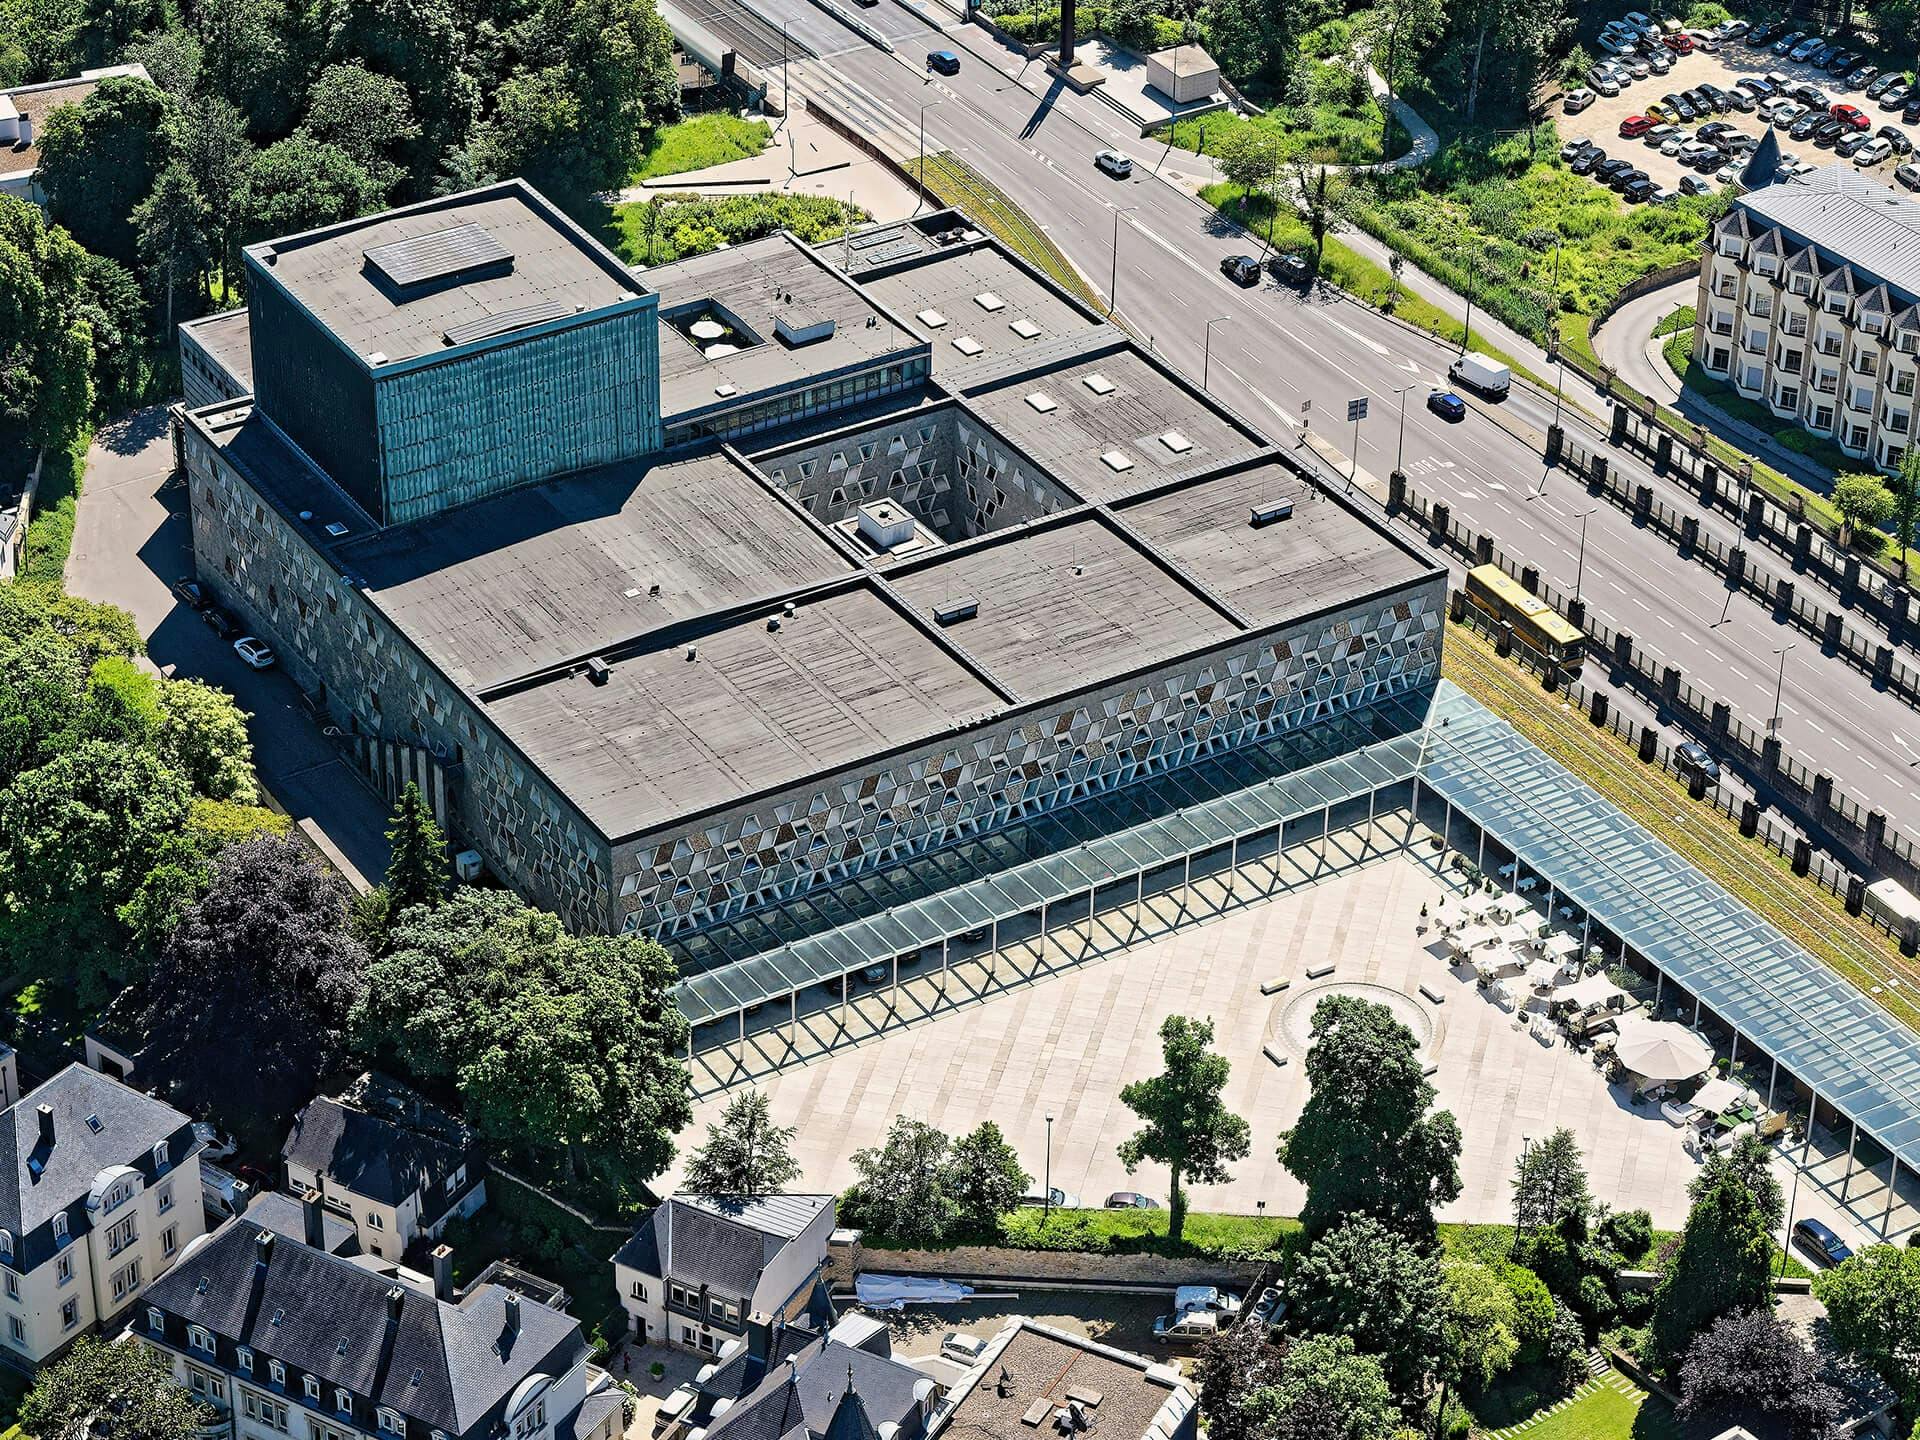 The Grand Theatre of Luxembourg, one of the most emblematic building of the capital.